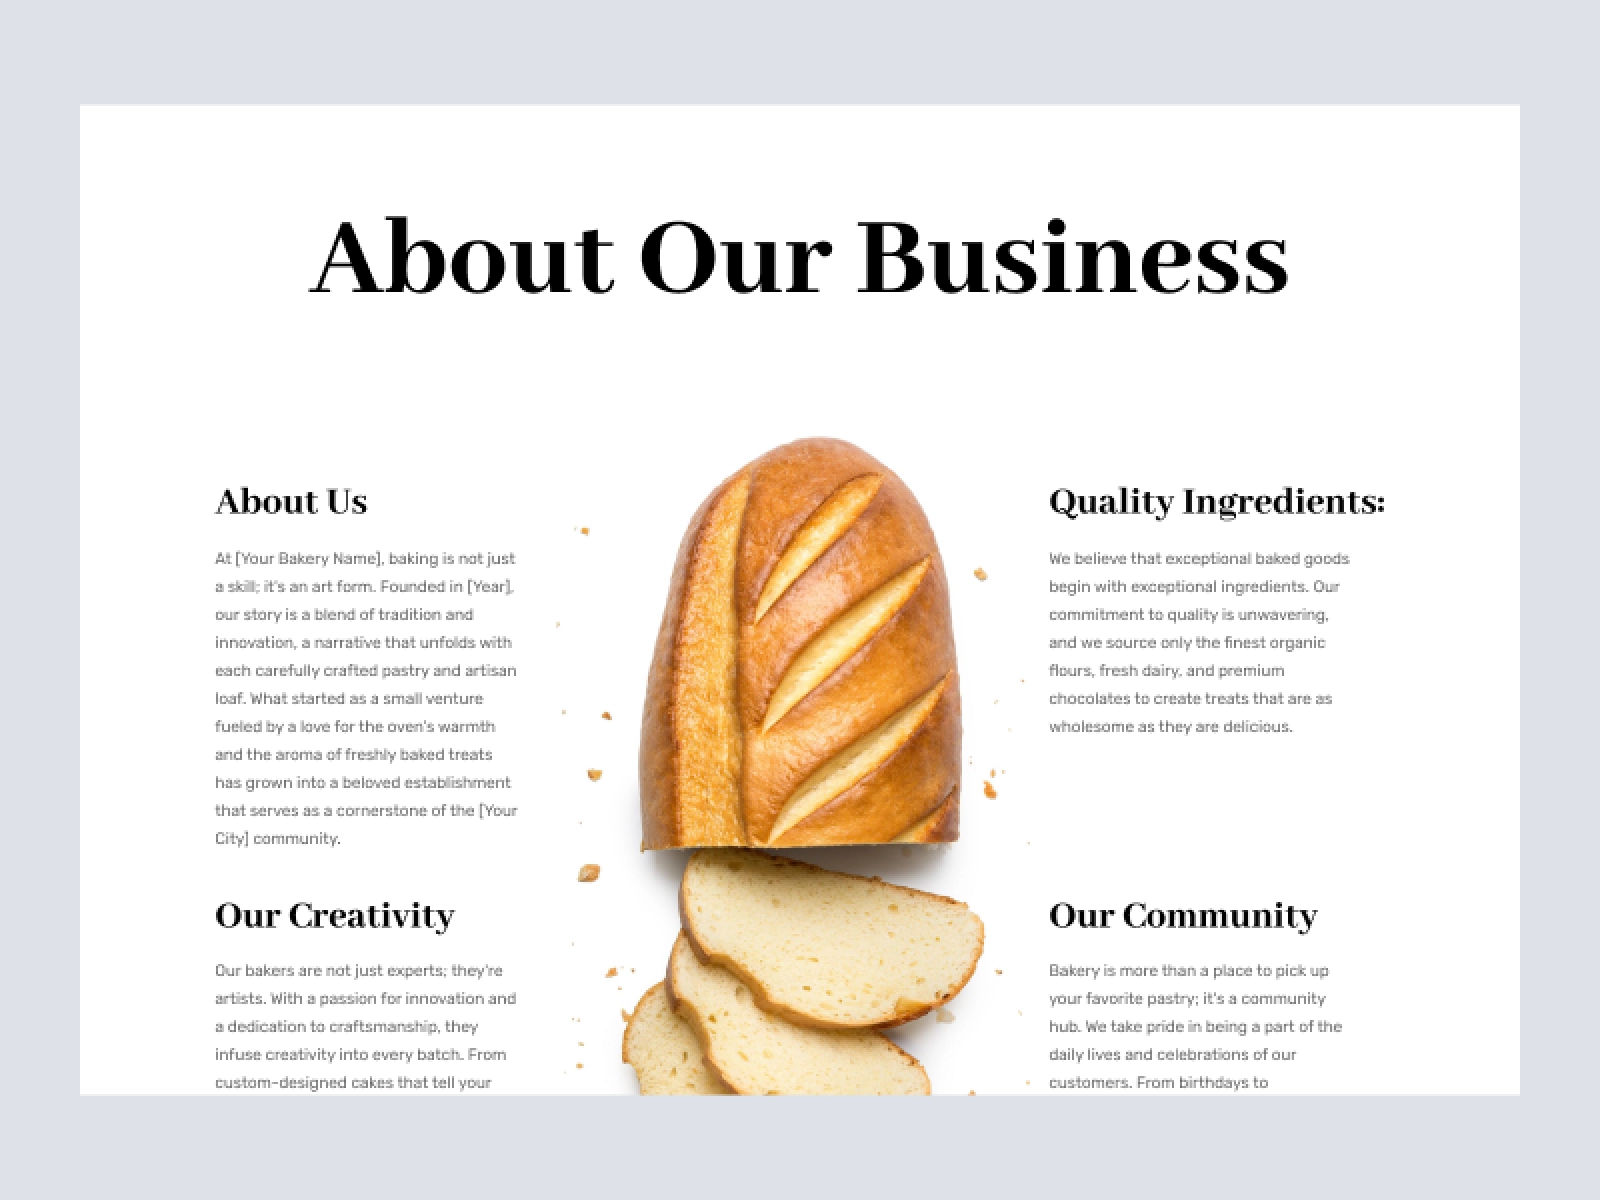 Bakery Shopify Store Design for Adobe XD - screen 5